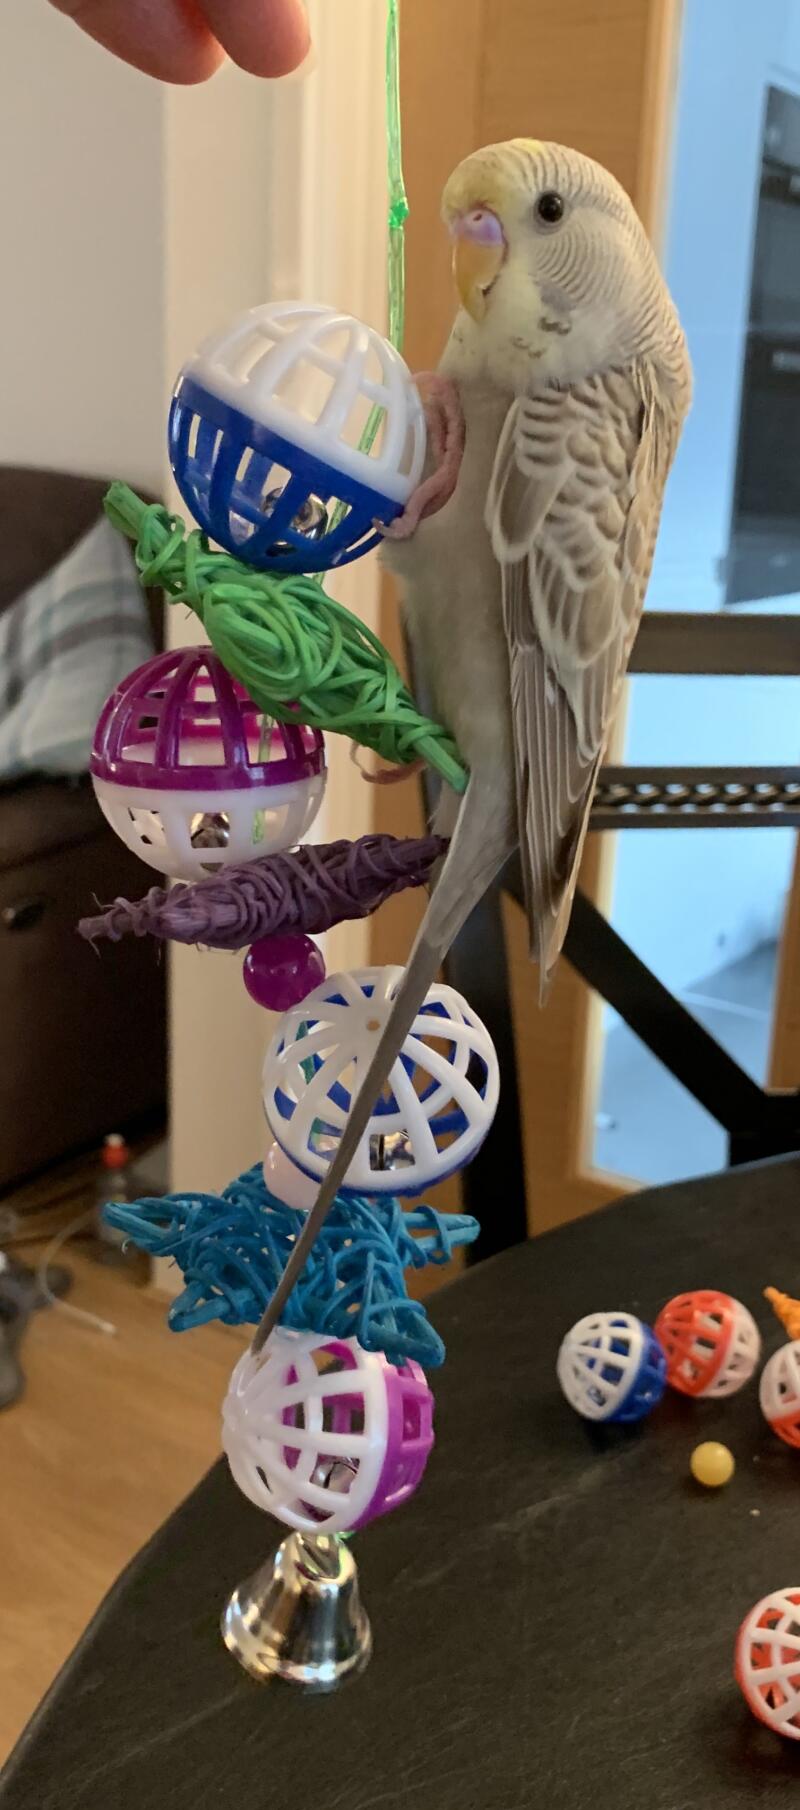 A budgie hanging from a tree made of plastic balls and stars